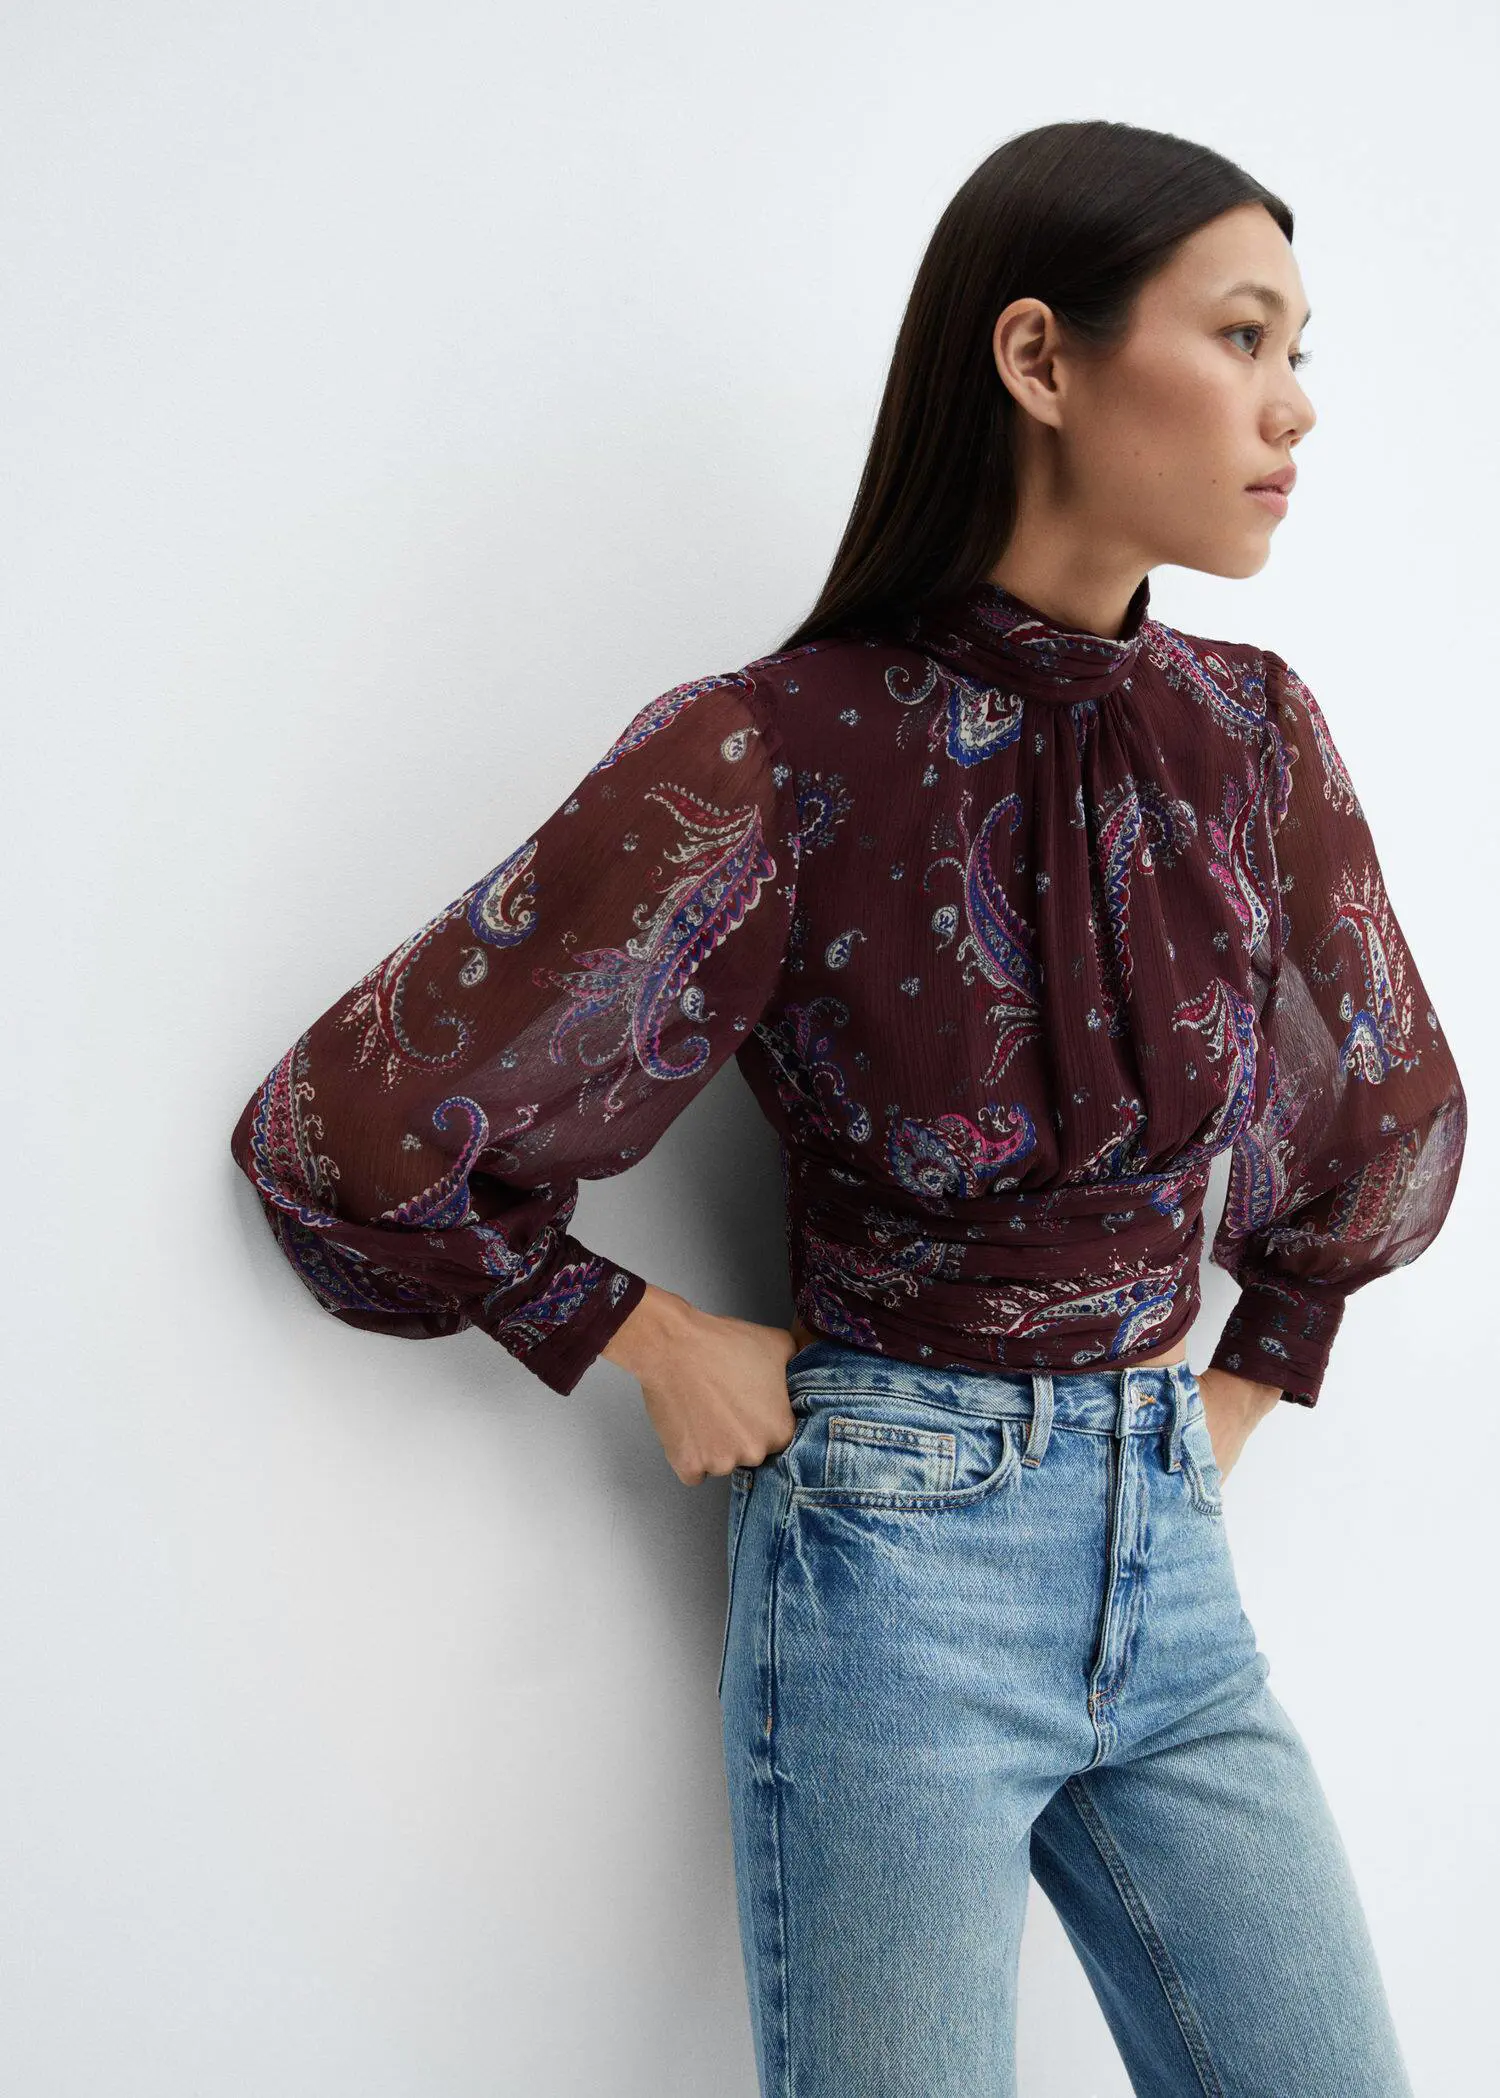 Mango Paisley blouse with puffed sleeves. 1